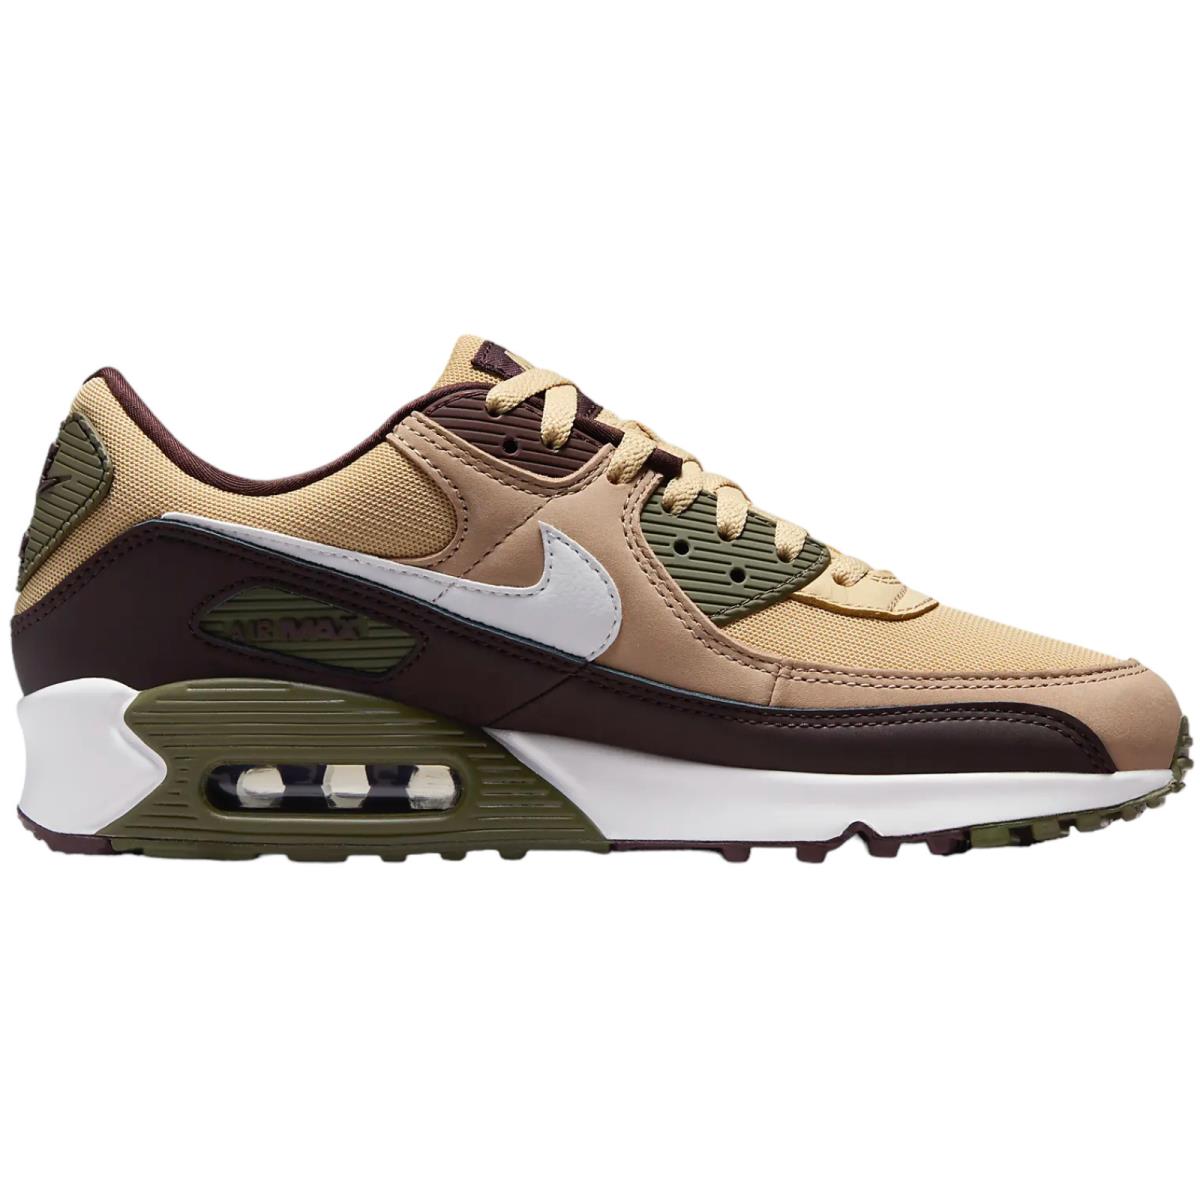 Nike Air Max 90 Men`s Casual Shoes All Colors US Sizes 7-14 Bestseller Hemp/Sesame/Earth/Summit White